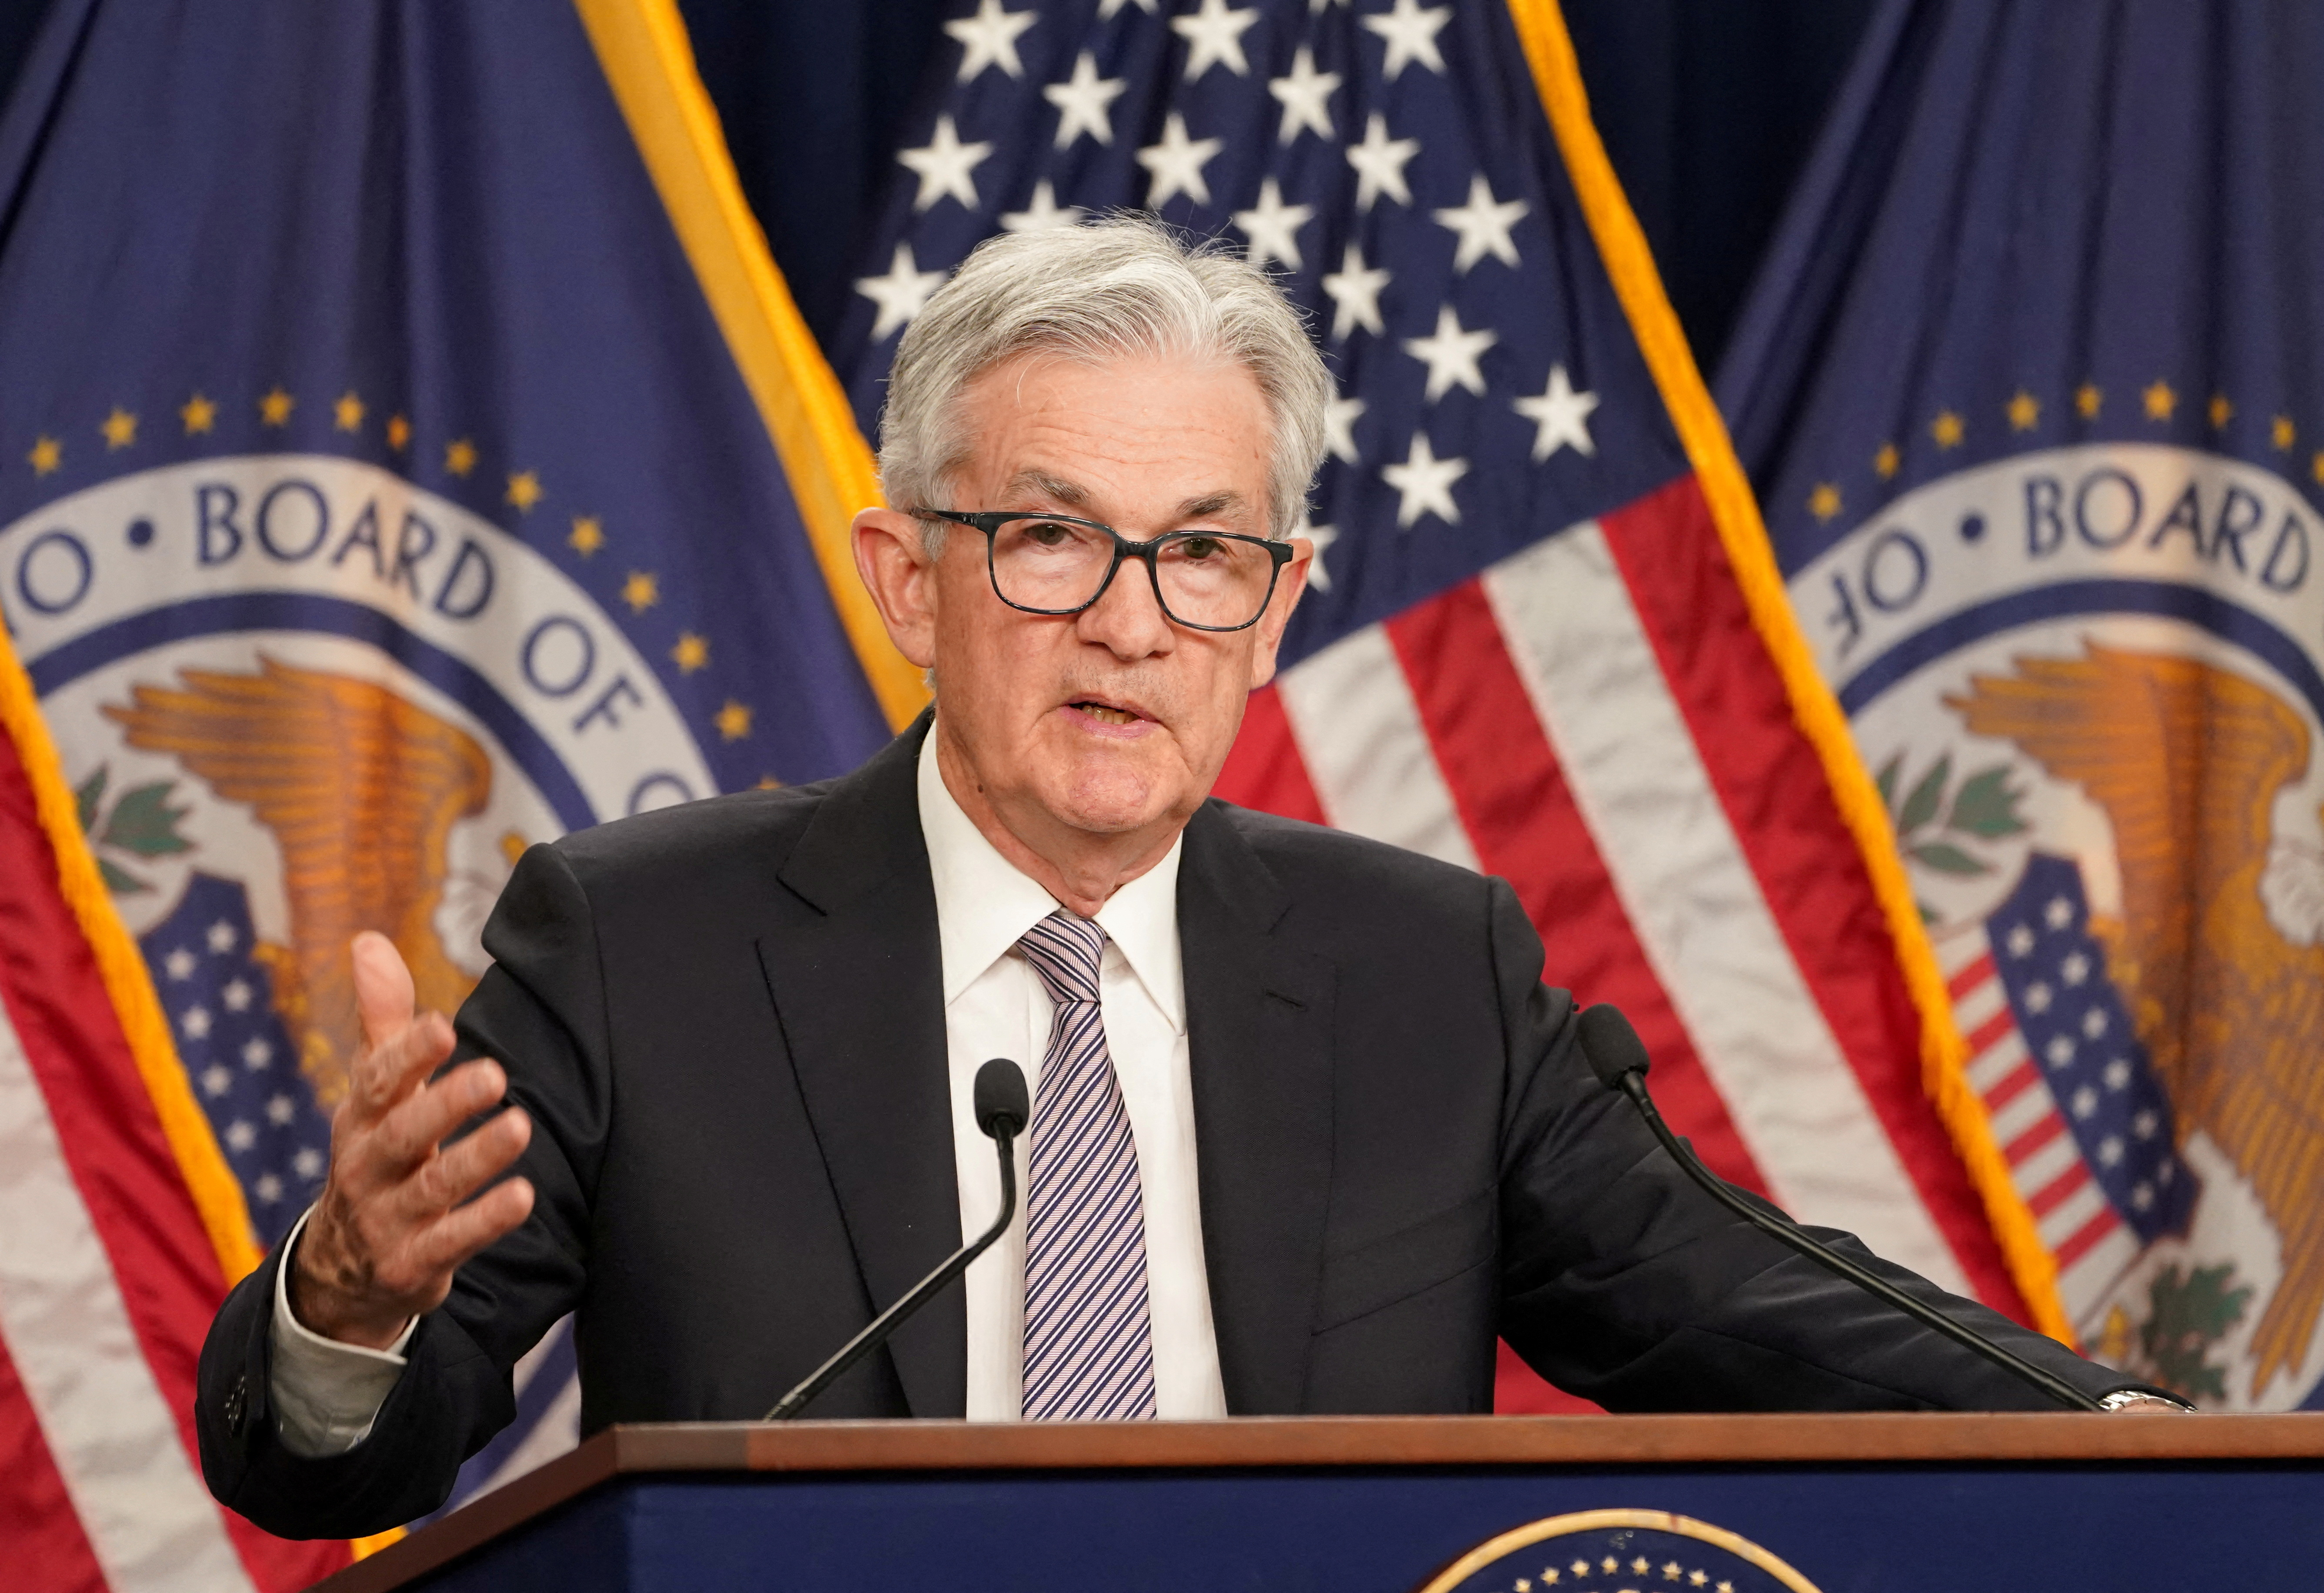 Federal Reserve Chair Powell holds a press conference in Washington